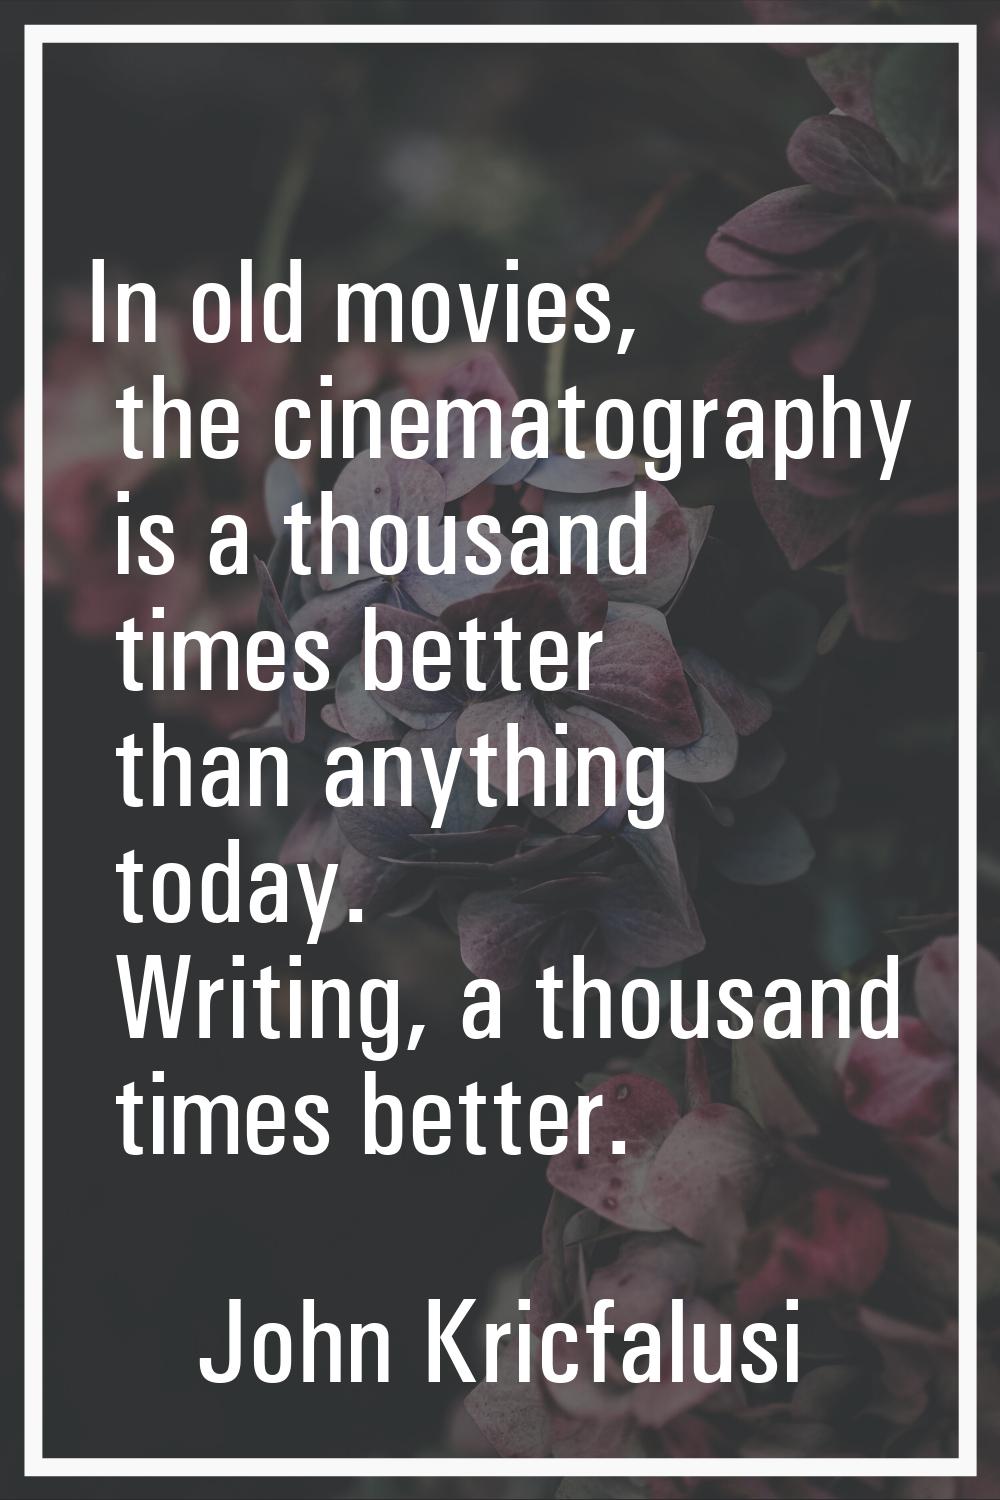 In old movies, the cinematography is a thousand times better than anything today. Writing, a thousa